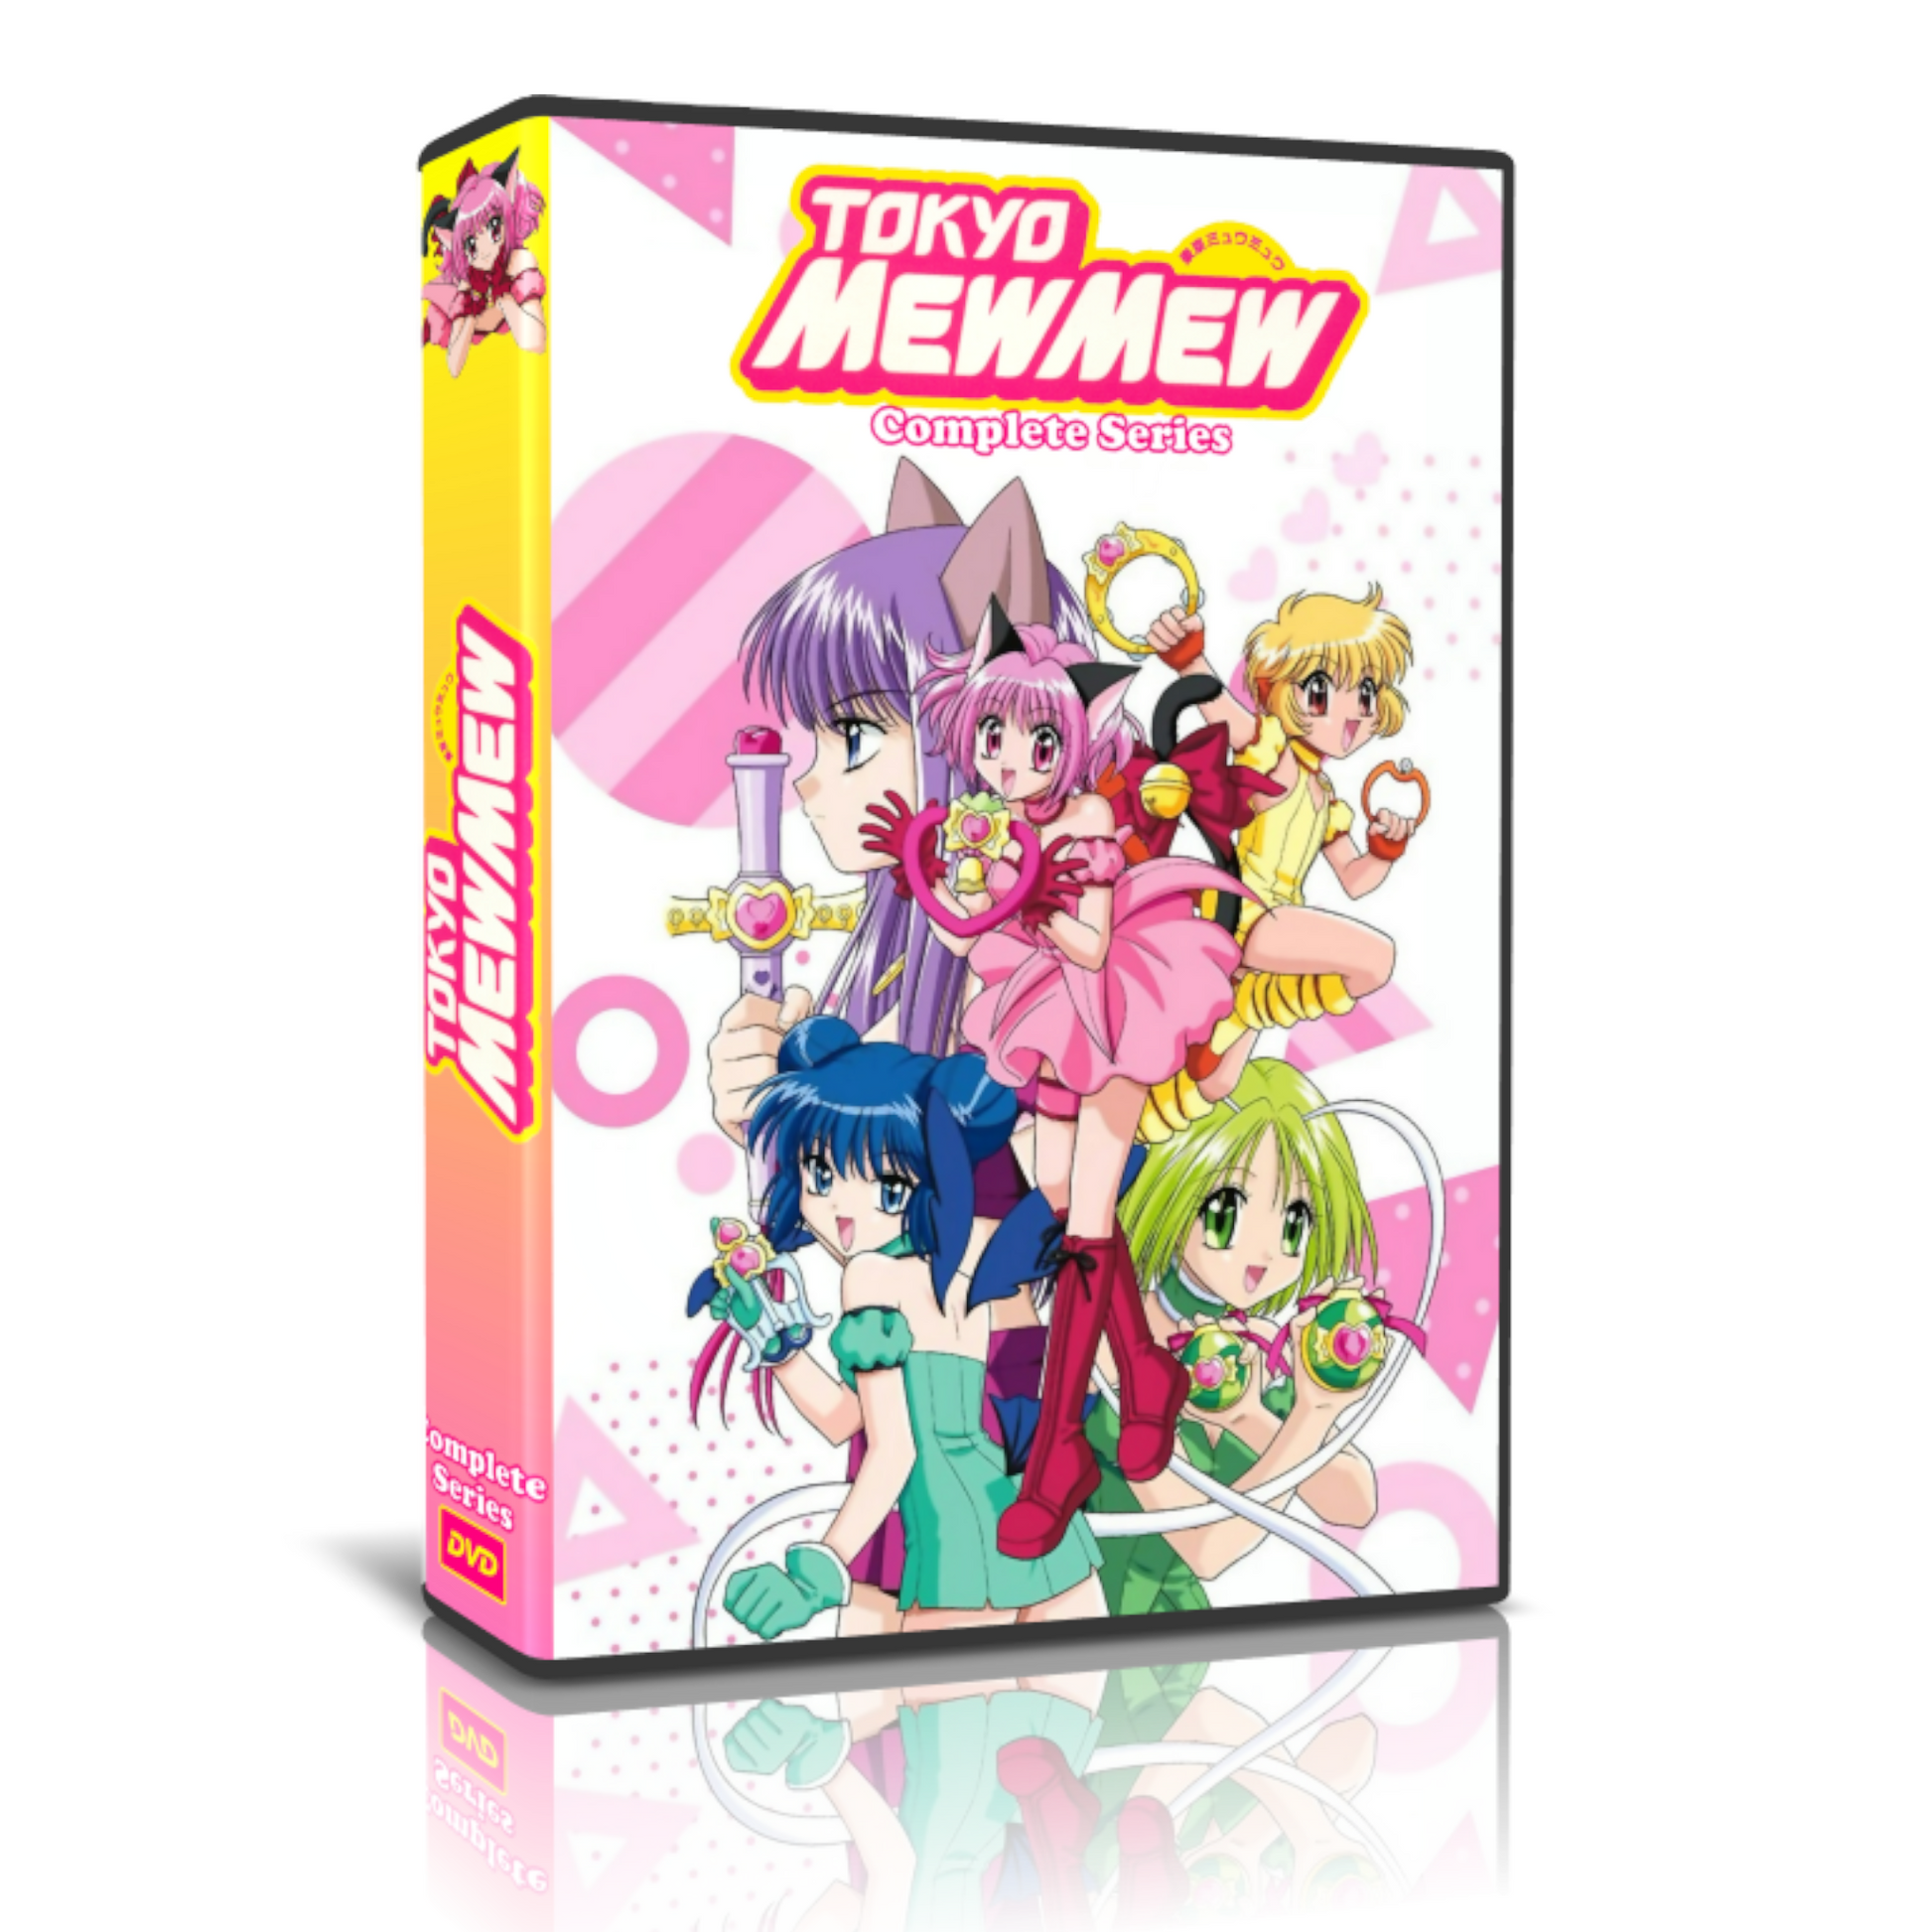 Tokyo Mew Mew Complete English Subs DVD Remastered Set - RetroAnimation 